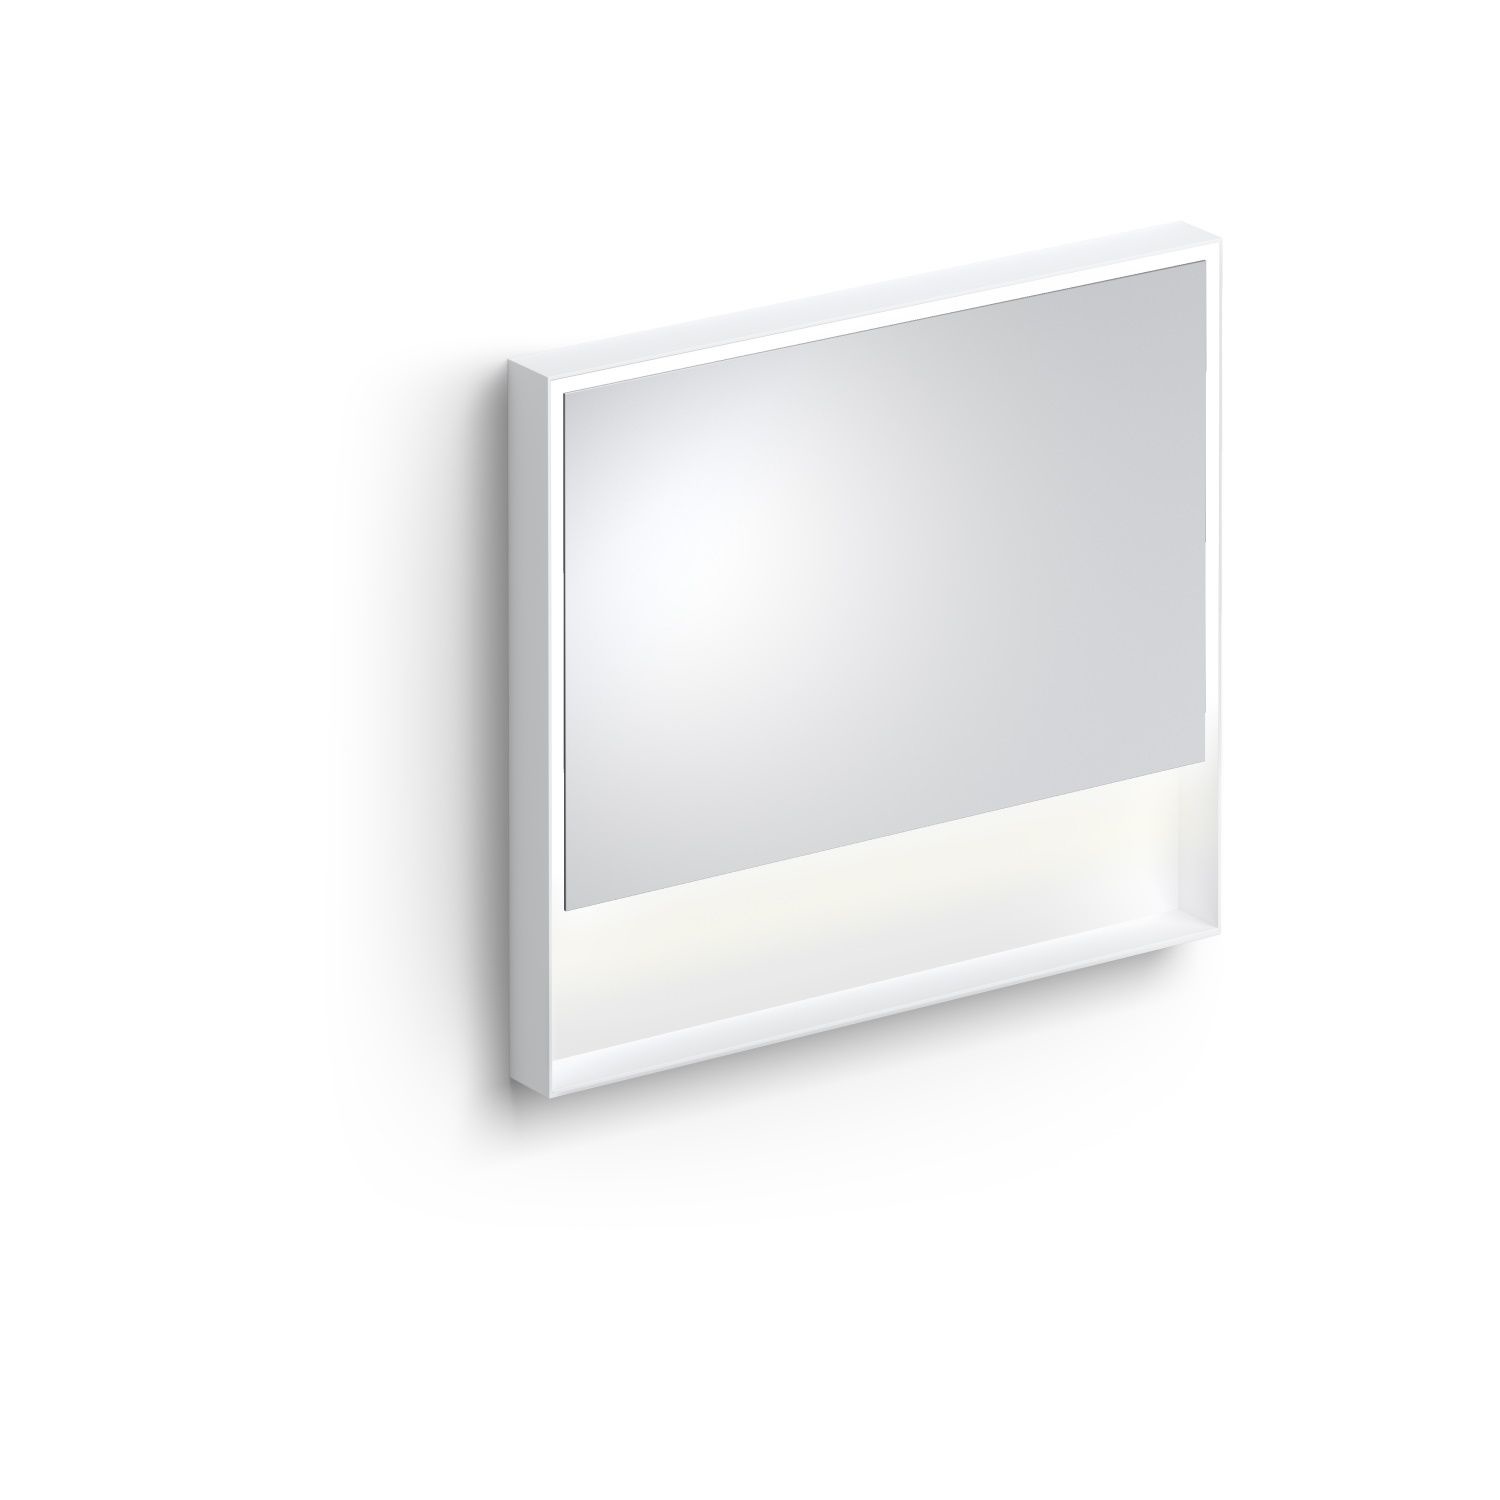 Clou Look At Me Spiegel 2700K LED-Verlichting IP44 Omlijsting In Mat Wit 90x8x80 cm Clou